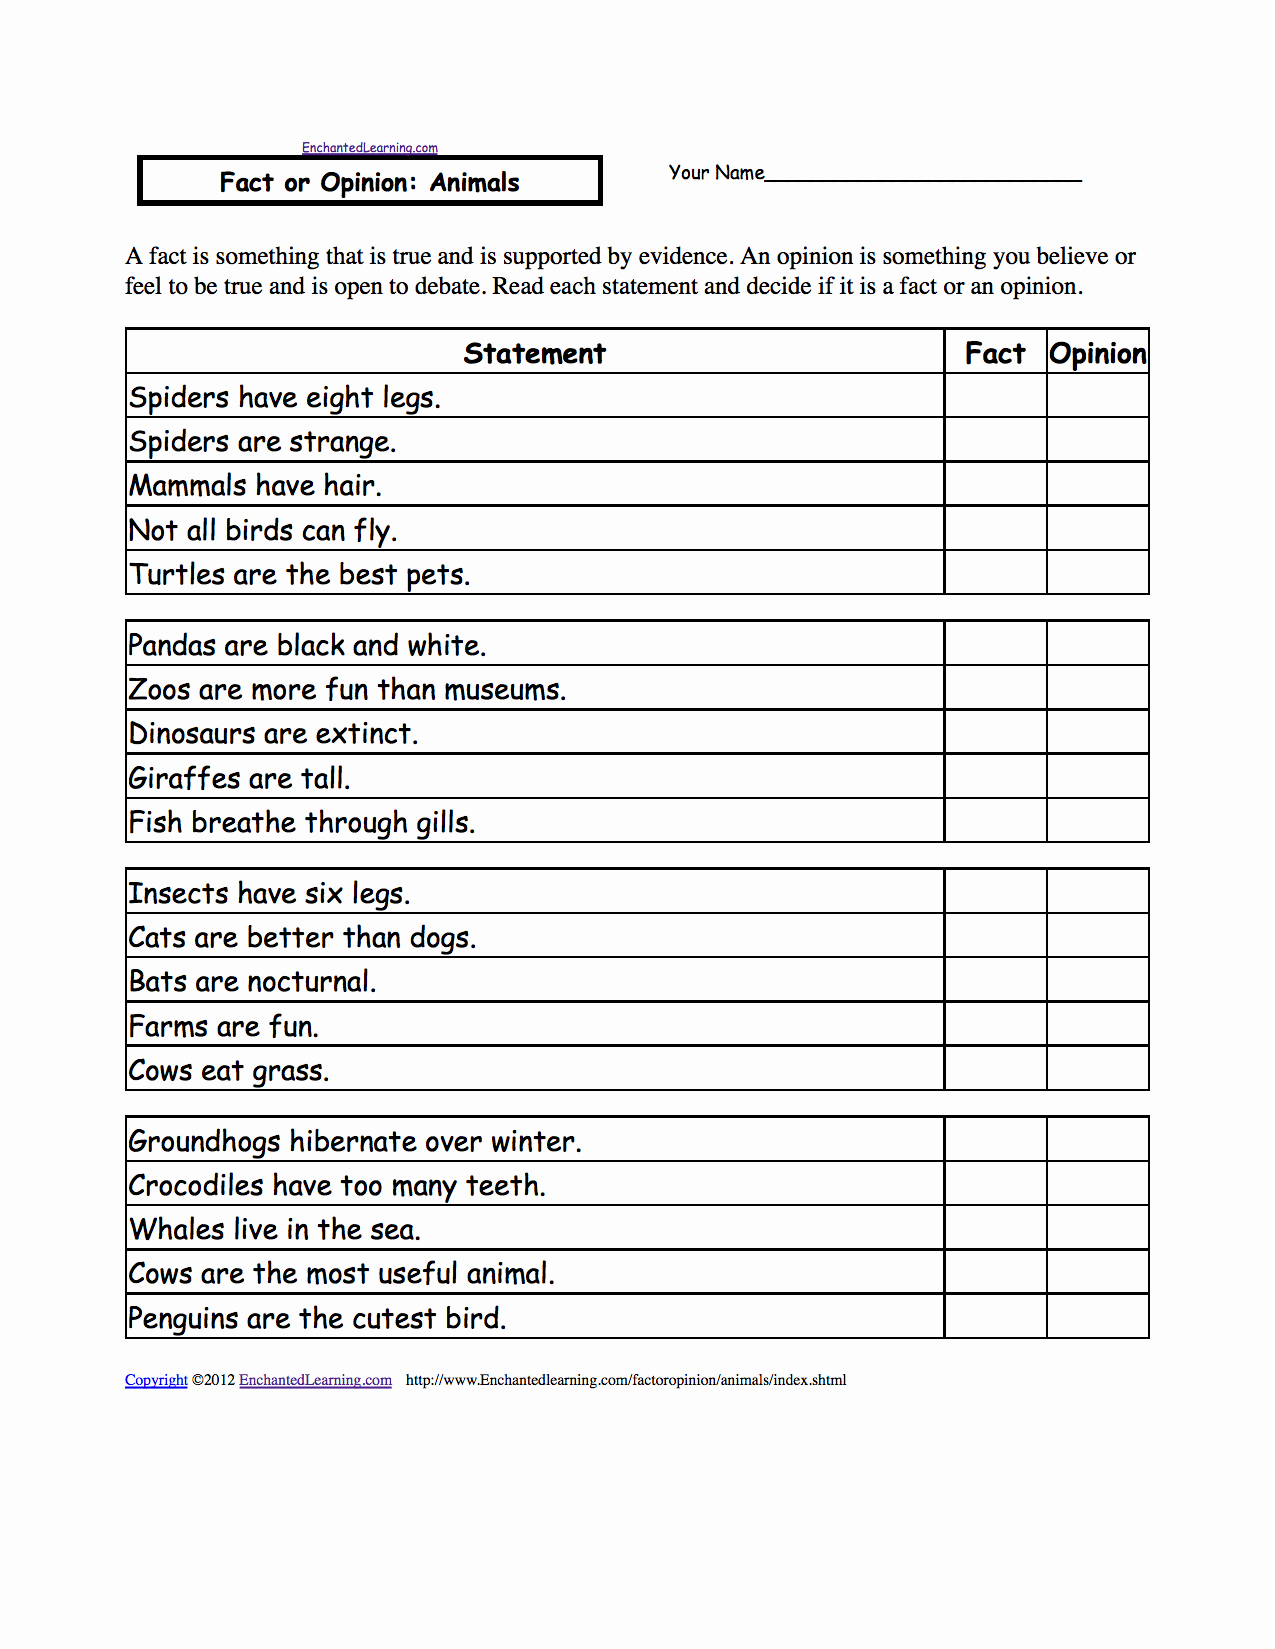 Fact or Opinion Worksheet Lovely Fact or Opinion Worksheets to Print Enchantedlearning